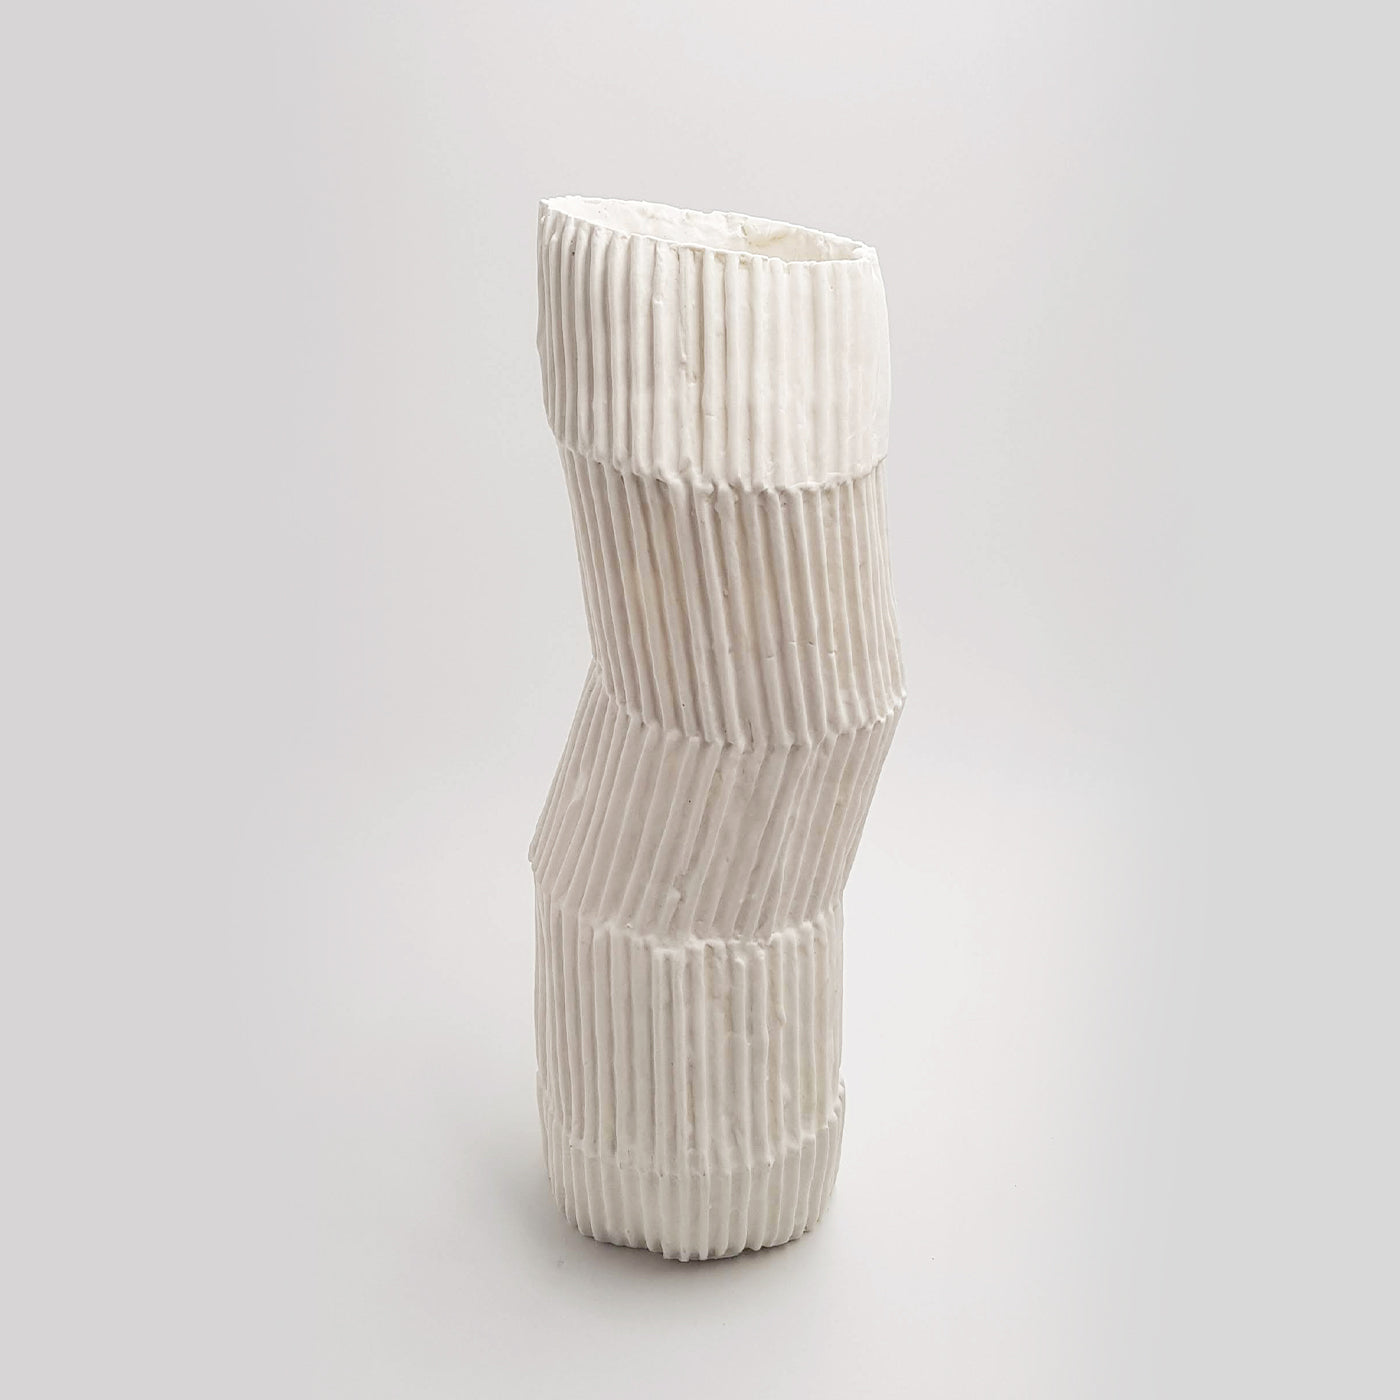 Le Torrette White Paperclay Vase by Nino Basso #1 - Alternative view 3